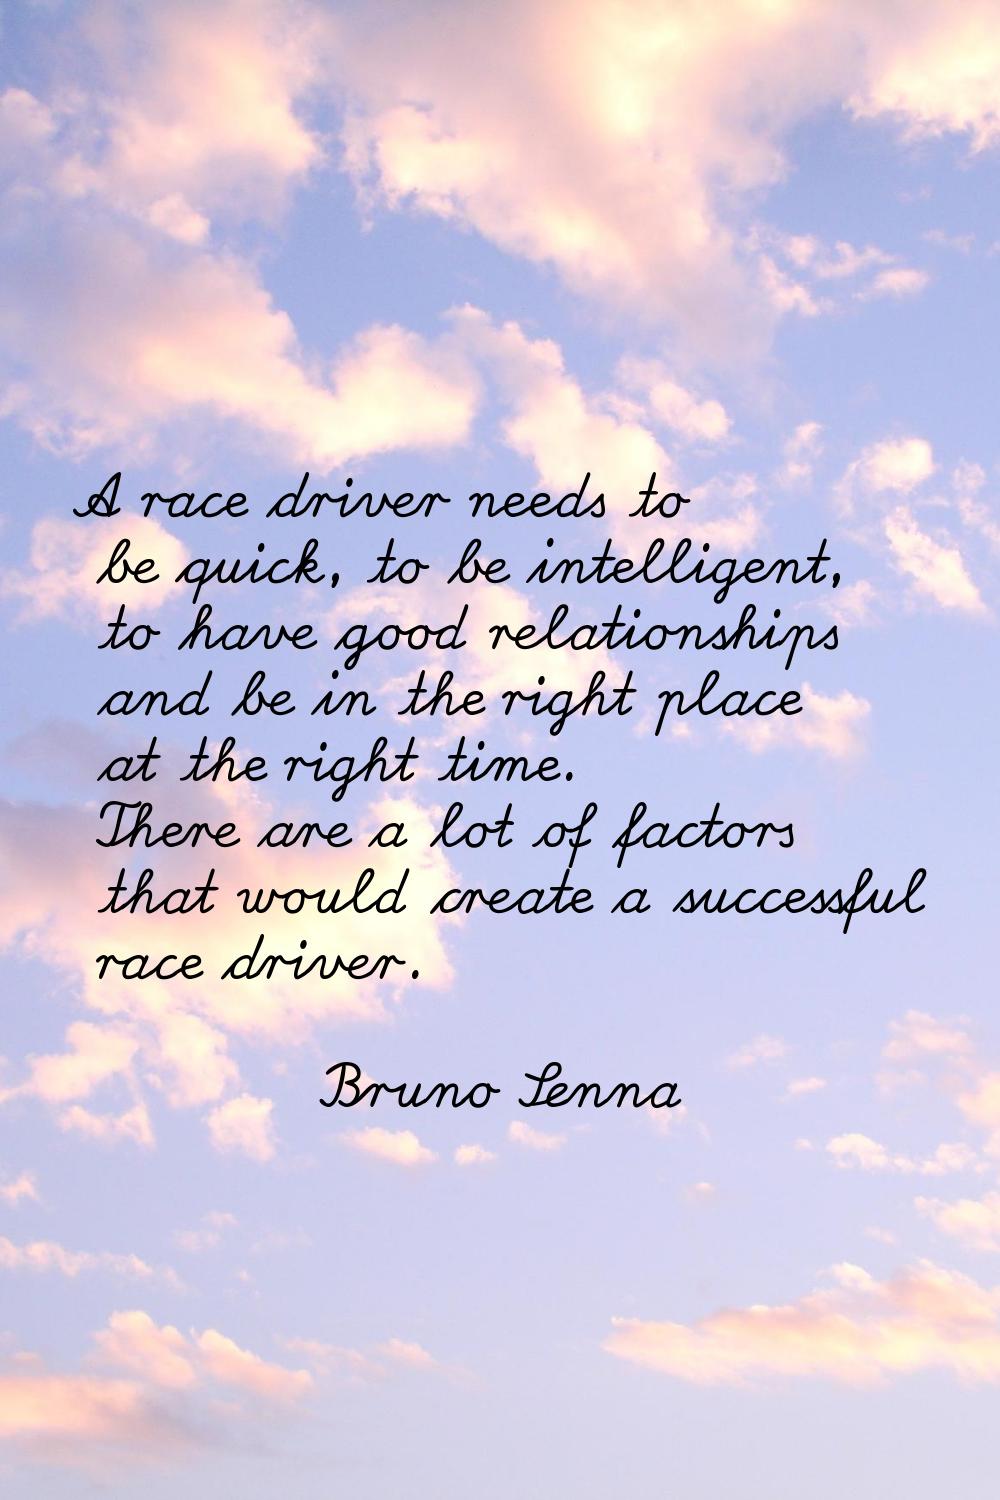 A race driver needs to be quick, to be intelligent, to have good relationships and be in the right 